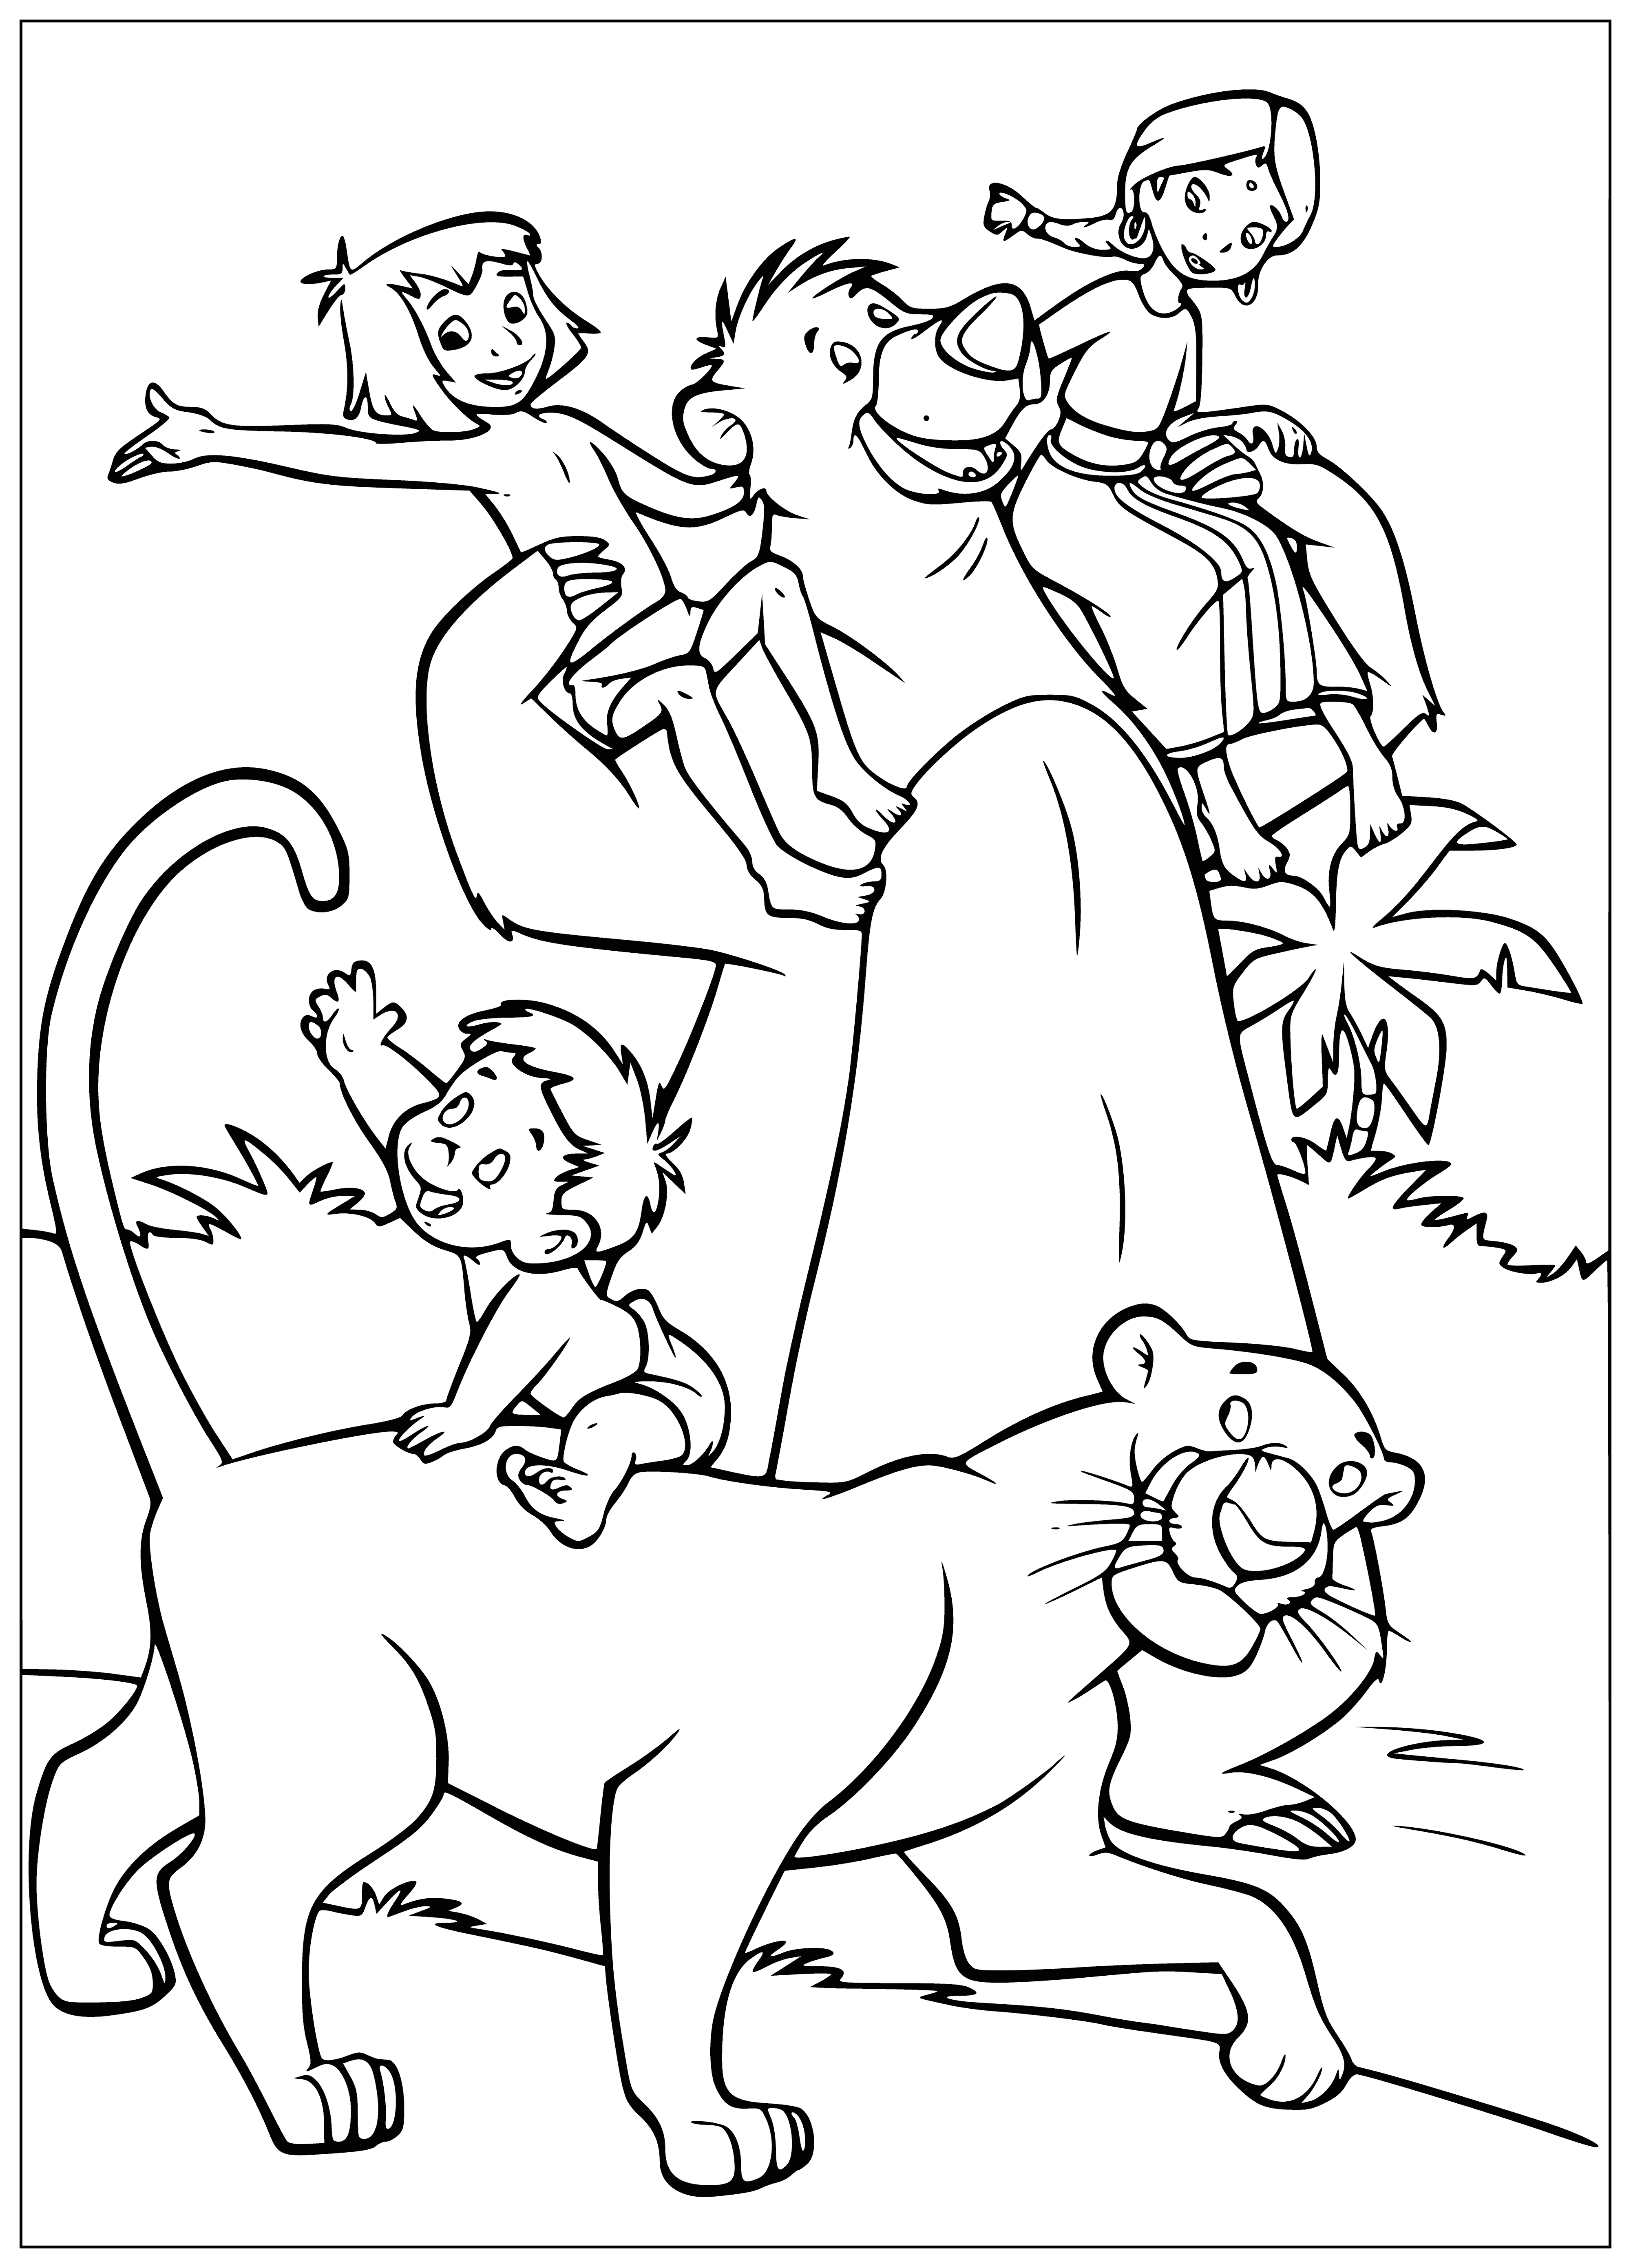 Victory! coloring page